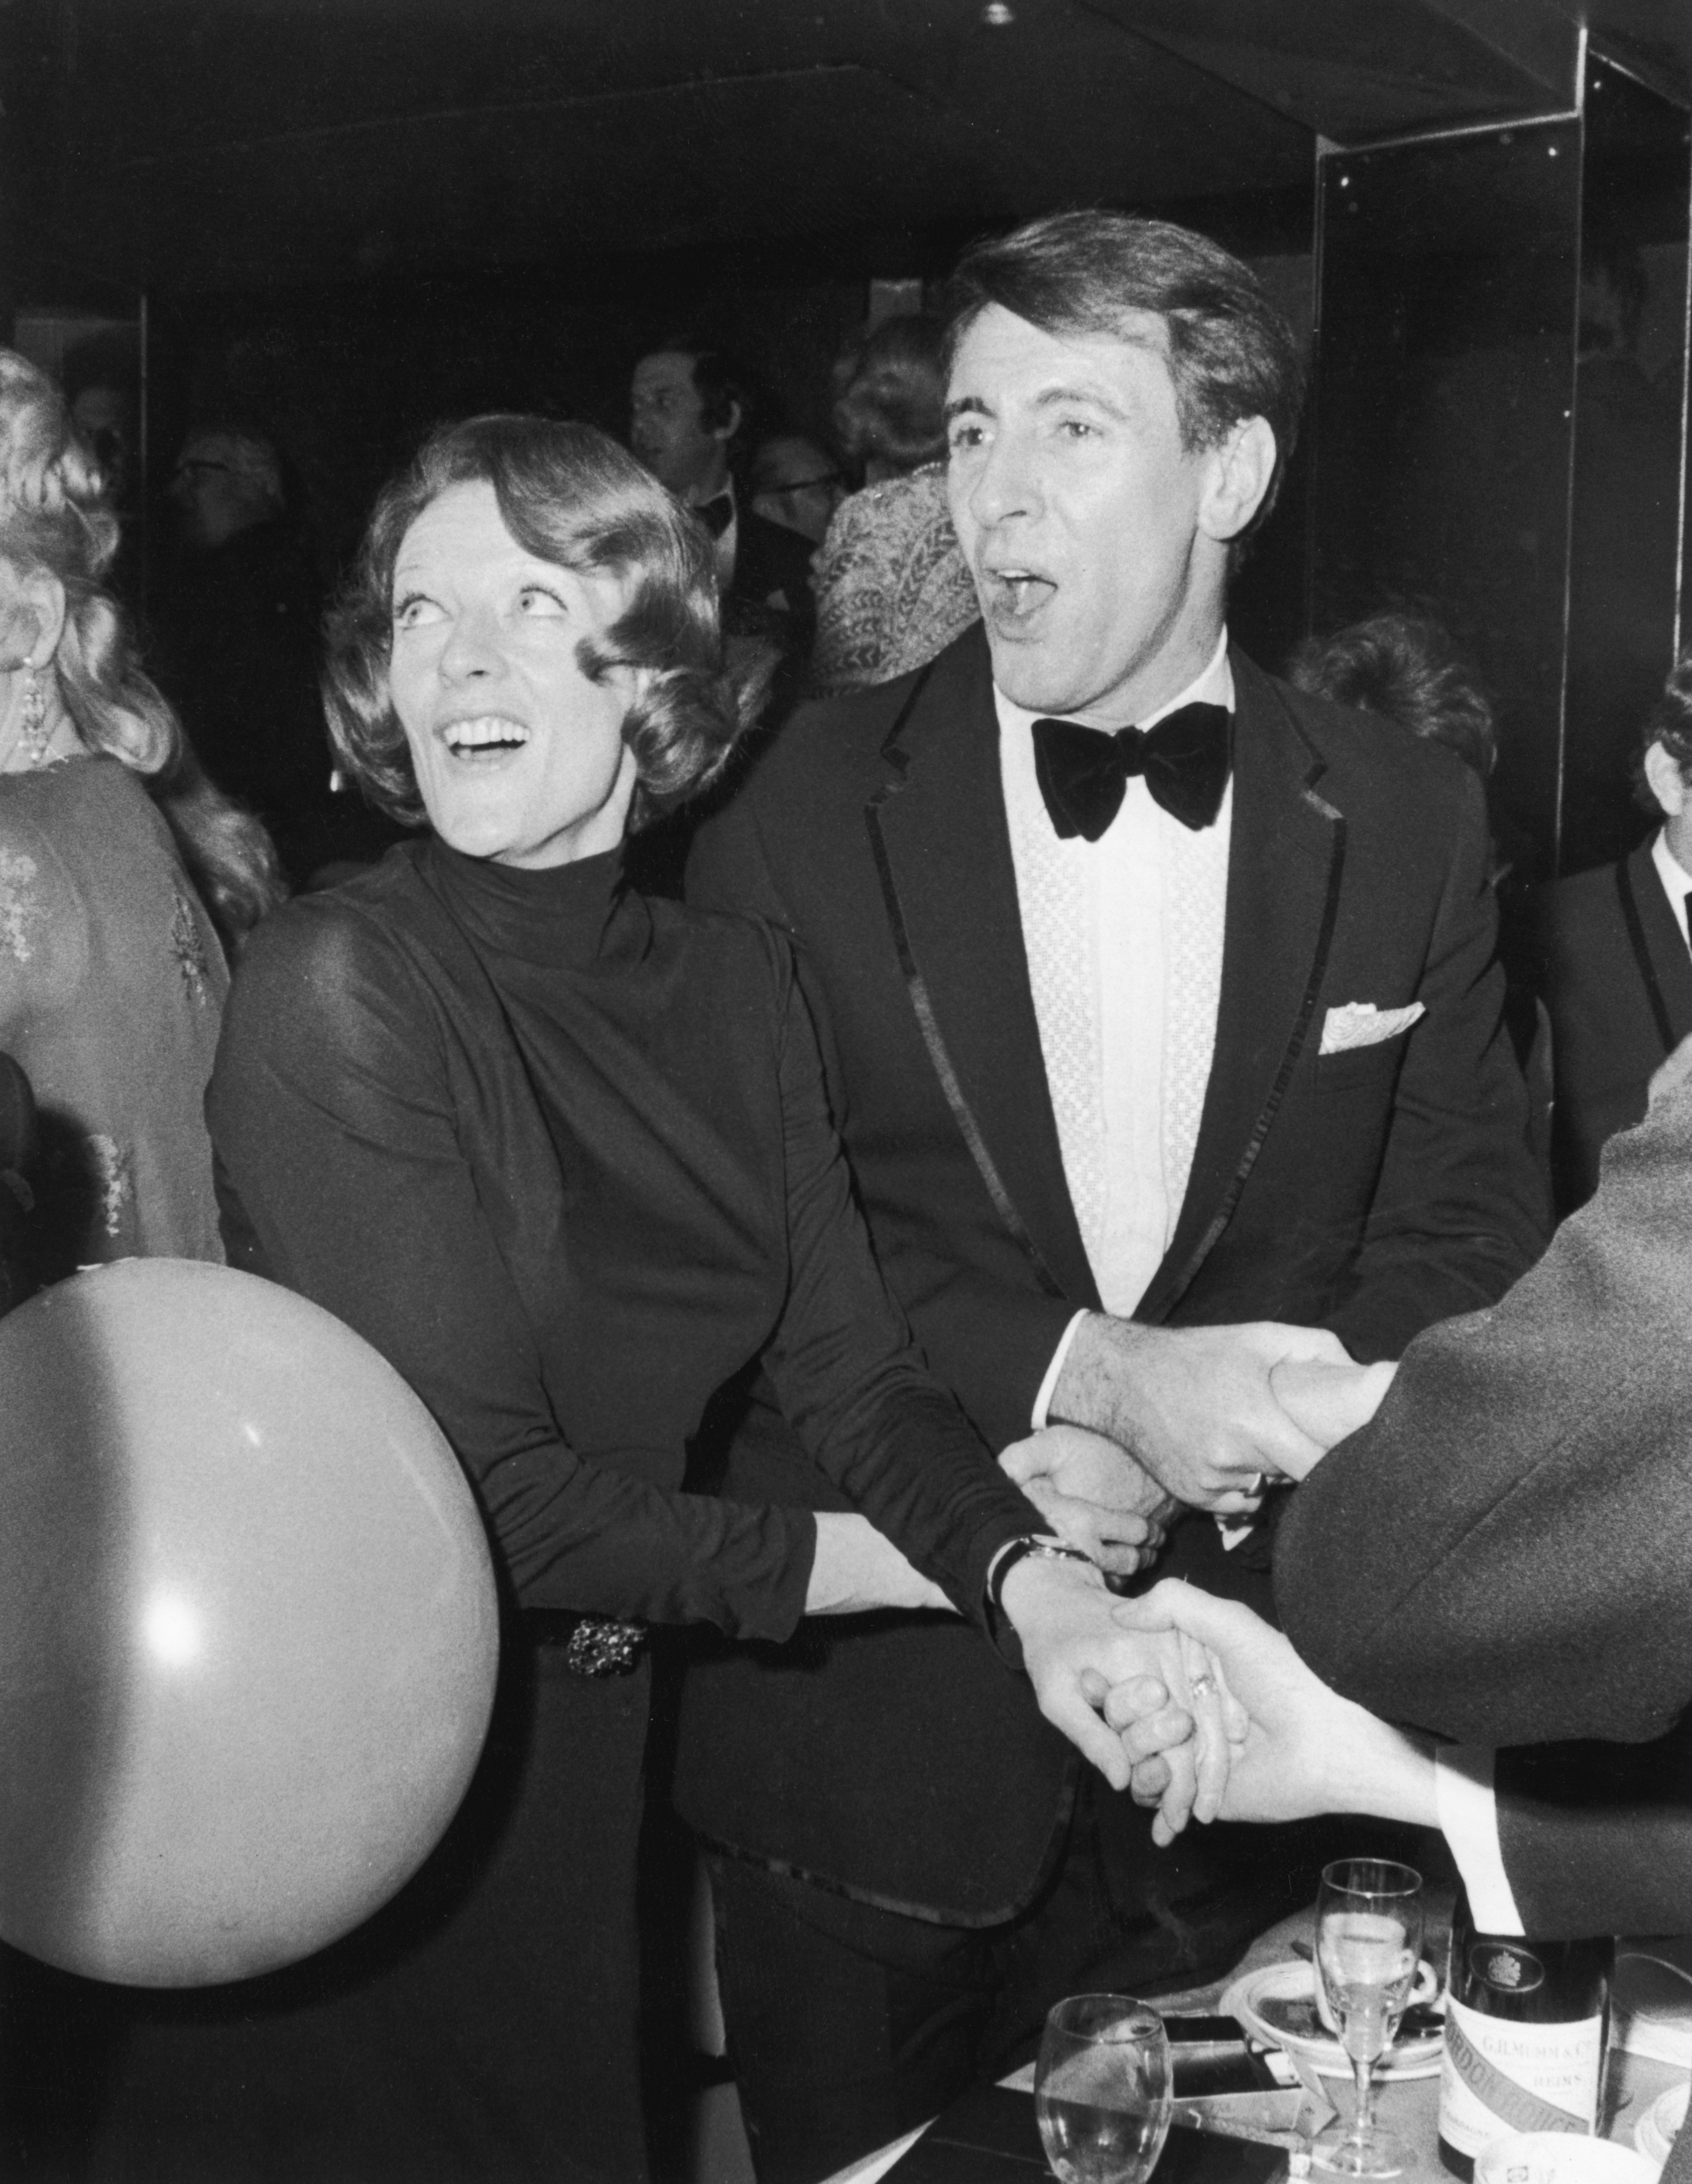 Maggie Smith and Robert Stephens lead the singing of "Auld Lang Syne" at a New Year's Eve party on January 1, 1973. | Source: Getty Images